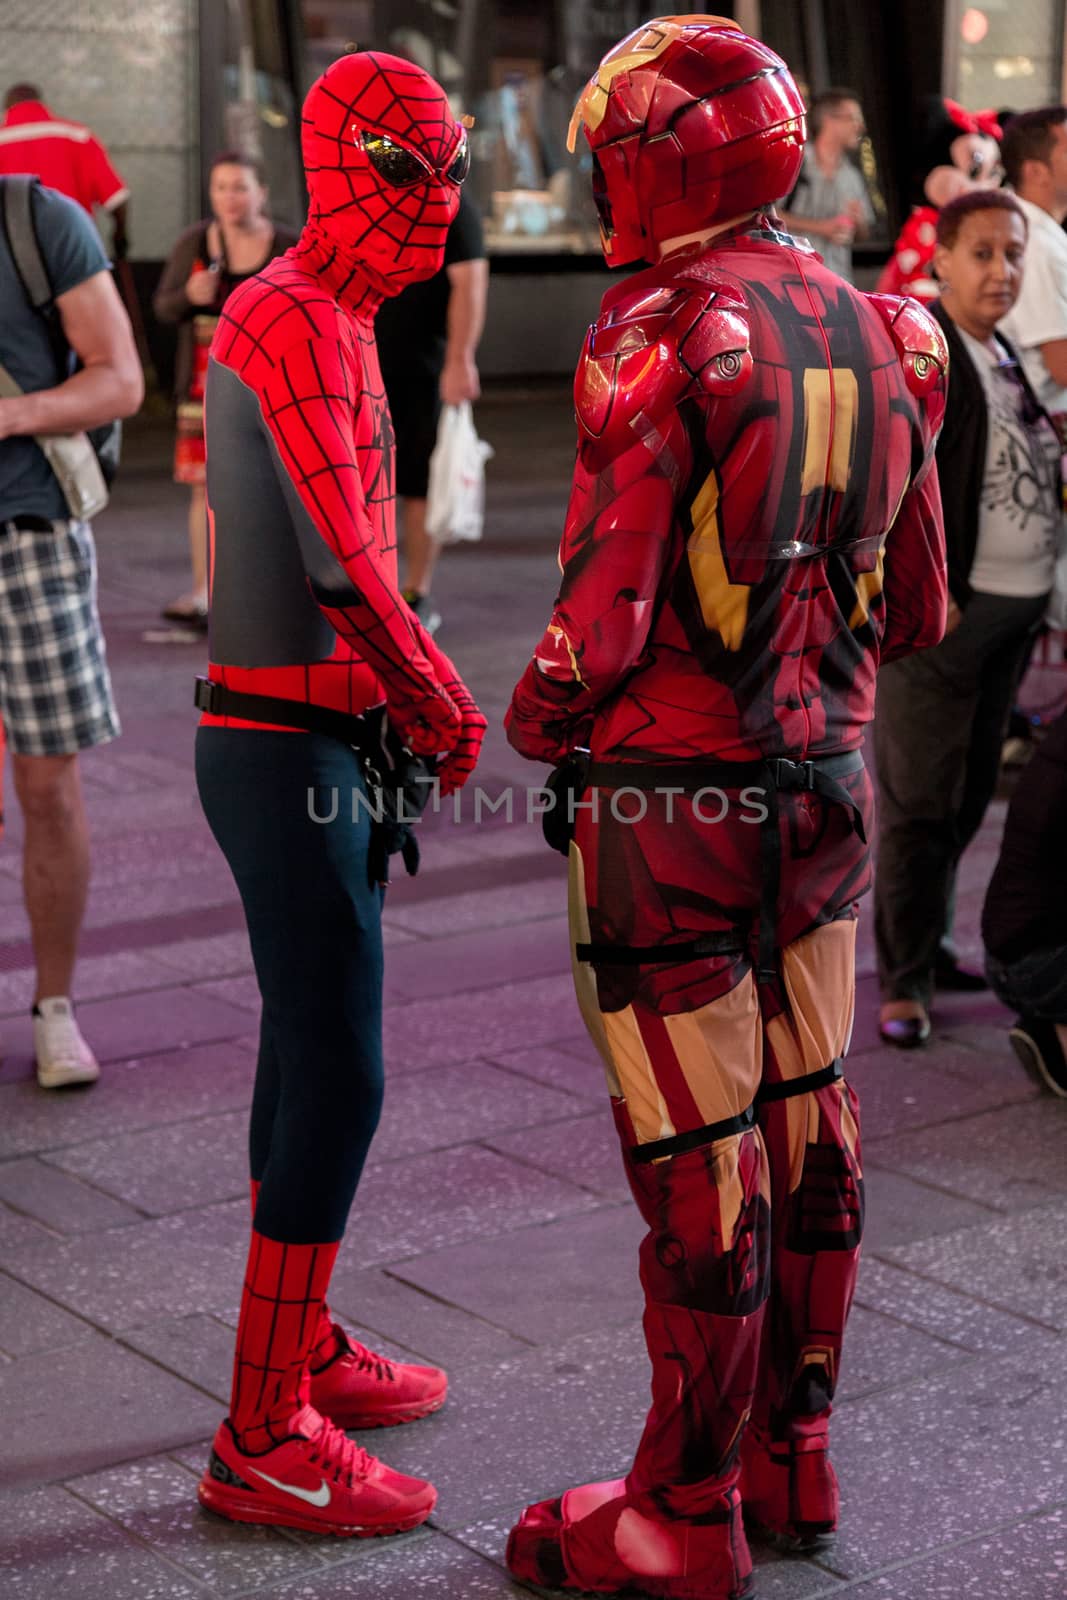 New York – Sept 2014: costumed superheroes and children's characters pose for photographs with Tourists on 42nd Street, Times Square on Sept 7, 2014 in New York, USA.